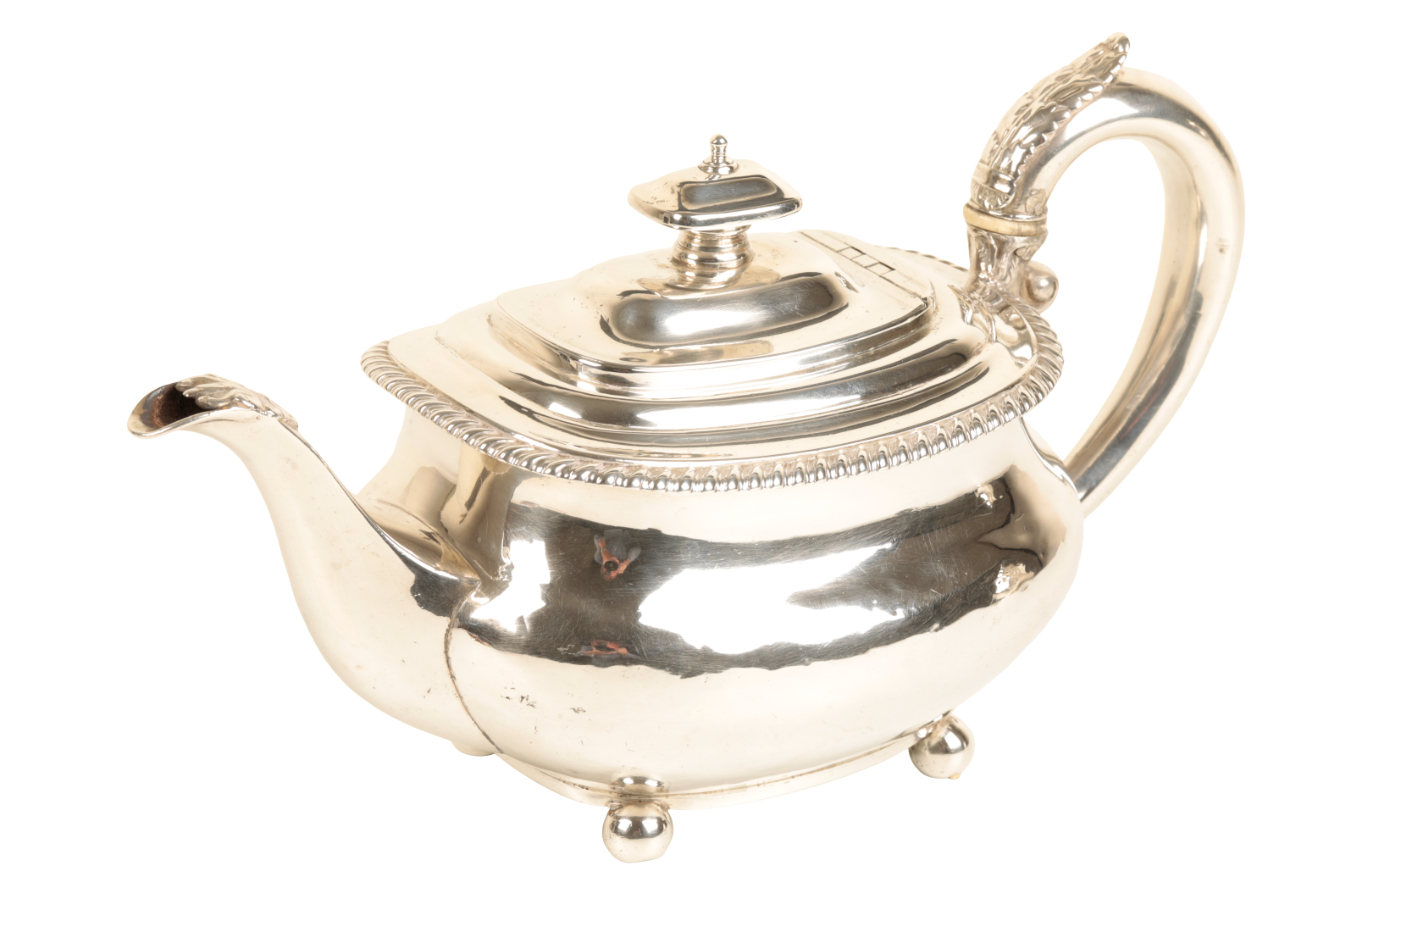 A GEORGE IV SILVER TEAPOT by William 338f95